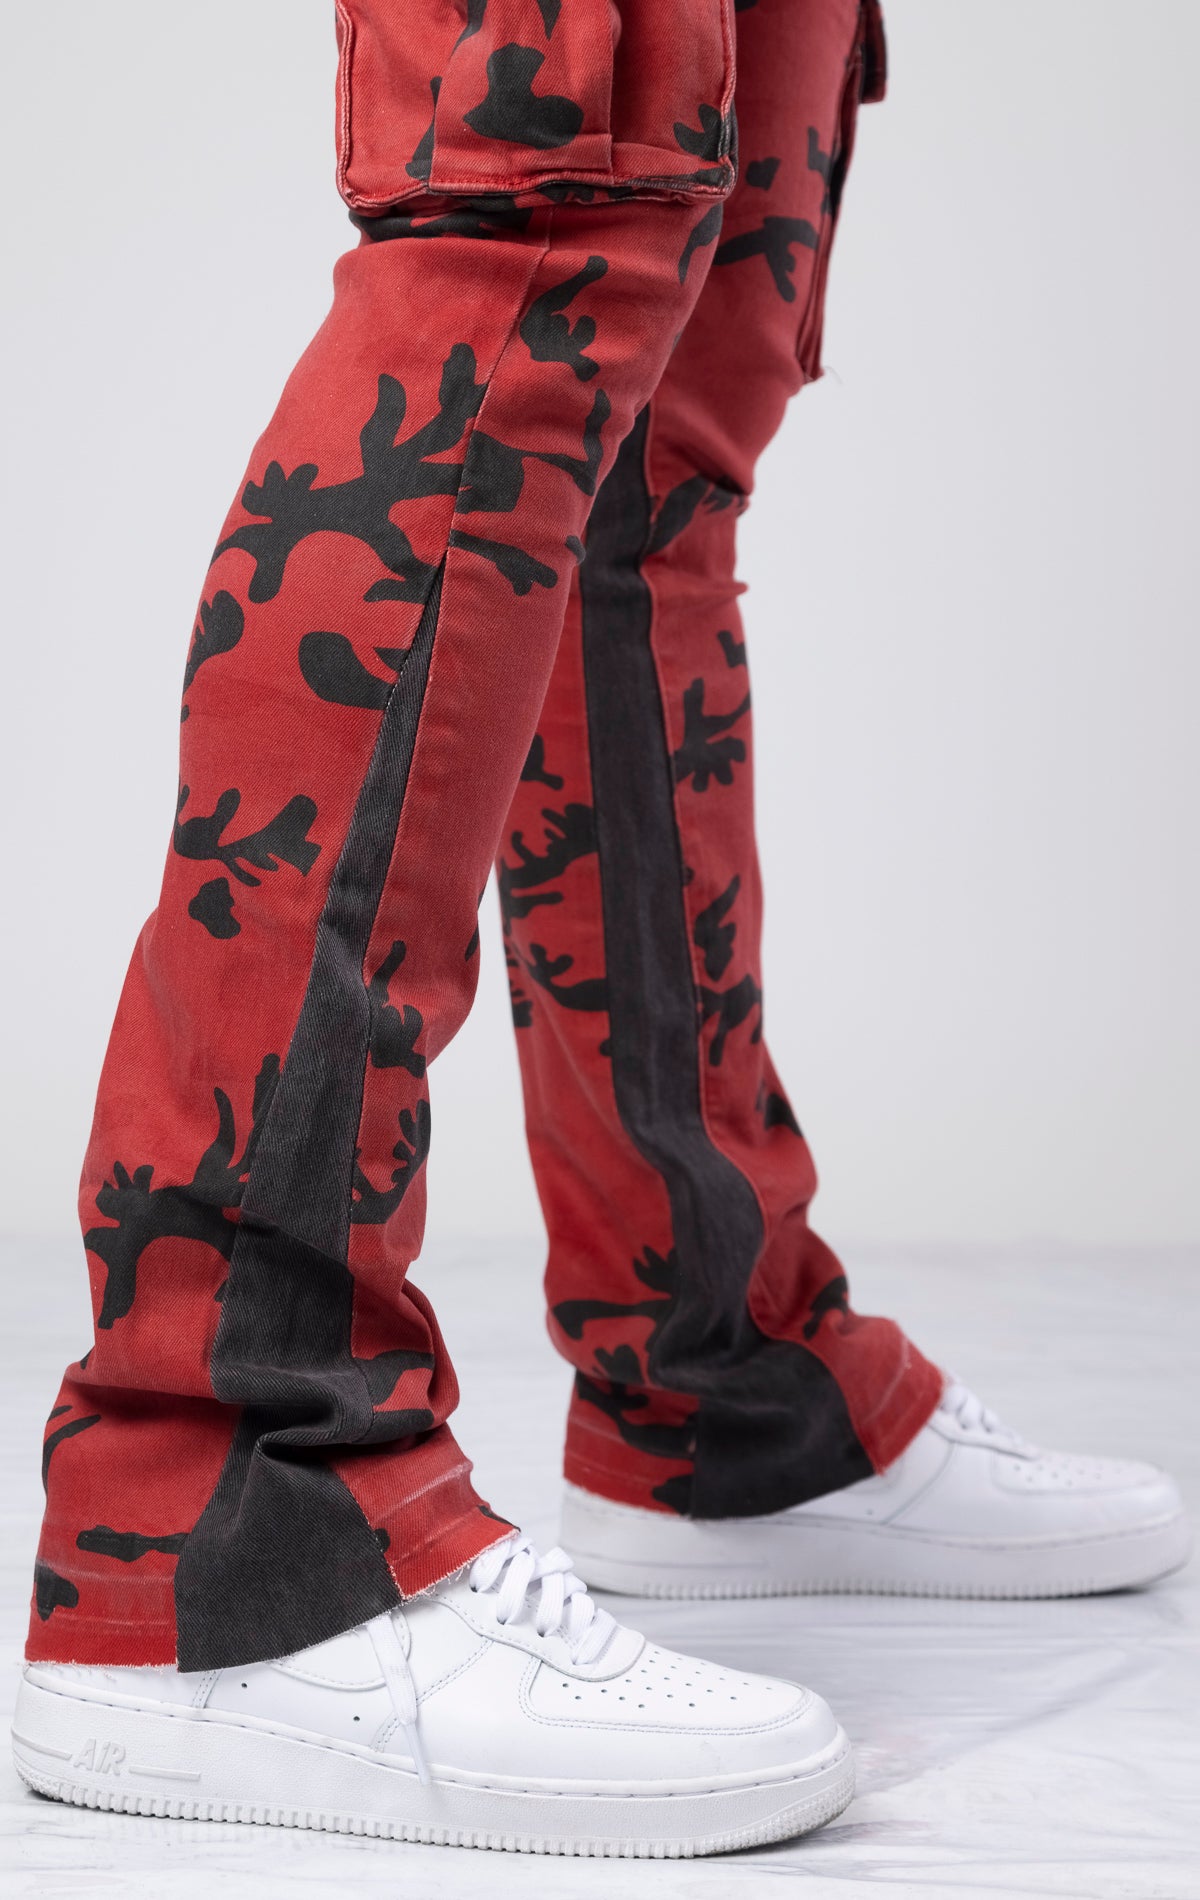 Red and black stacked flare denim jeans with a crimson forest all-over print. They have a contemporary, fitted silhouette that flares out from the knee. The jeans have multiple functional pockets with zipper details for closure and style. Made from a durable cotton blend with a touch of elastane for stretch and comfort, these jeans also include belt loops for added adjustability.